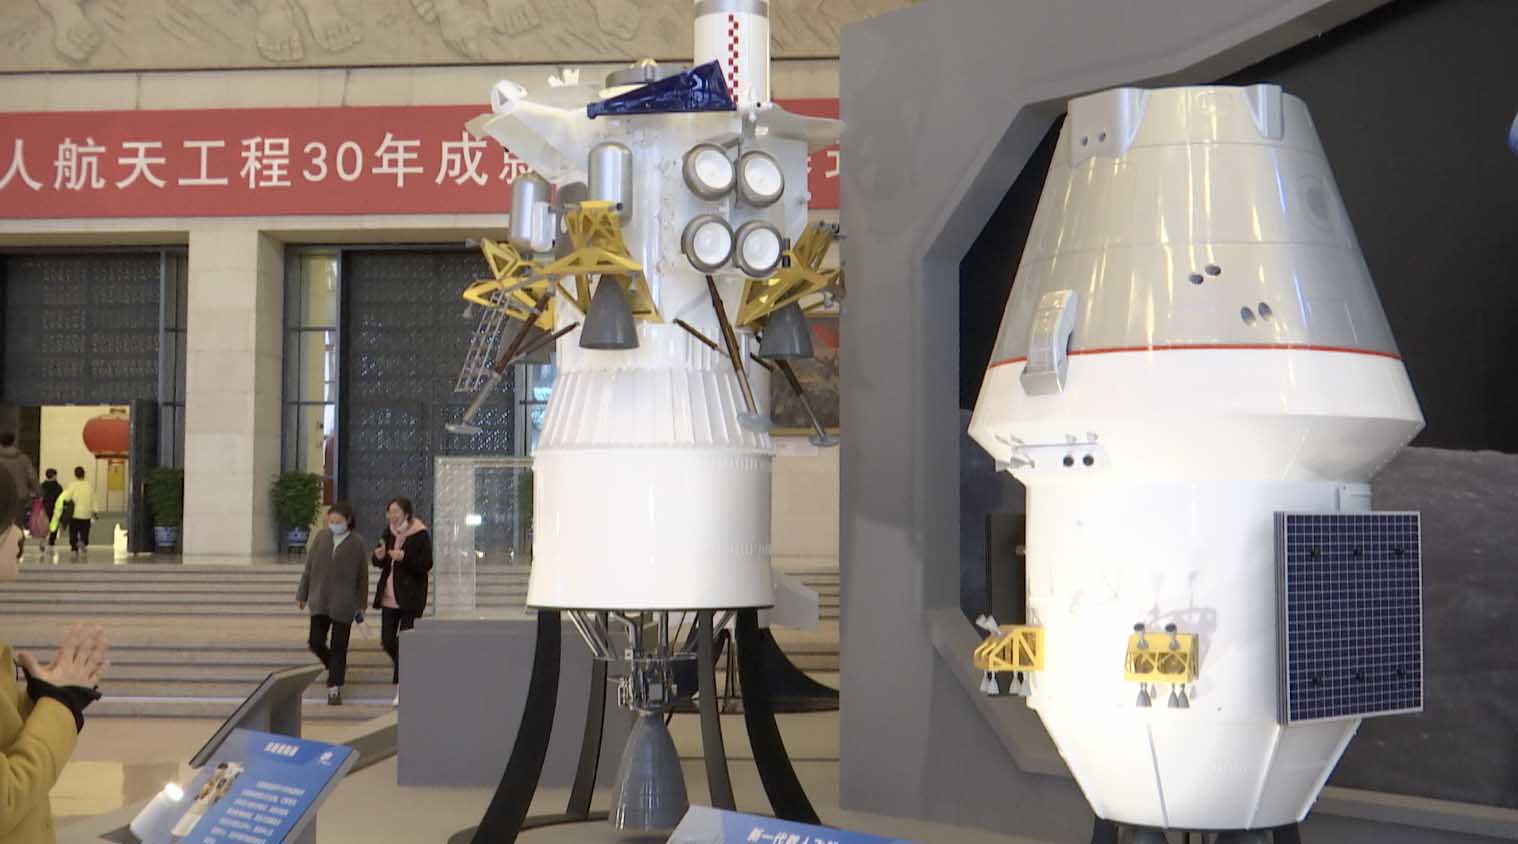 Models of a moon lander (L) and China's next-generation manned spacecraft (R) make their debuts at an exhibition in Beijing, China, February 24, 2023. /CGTN